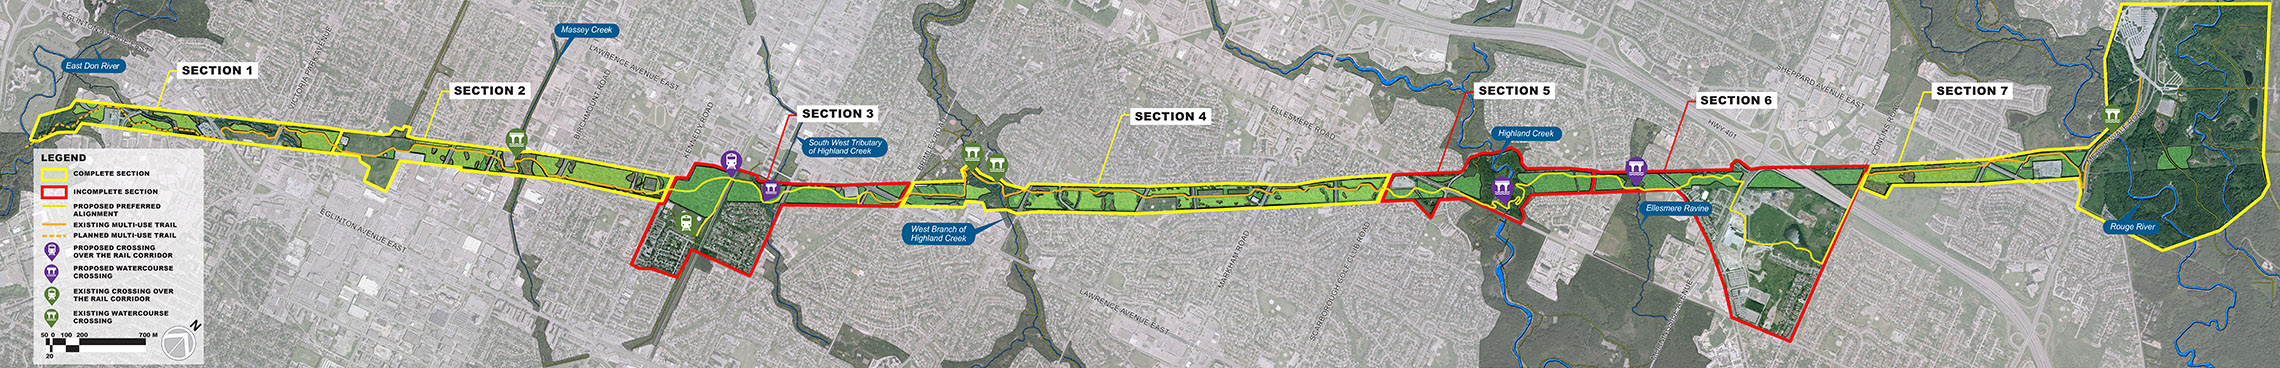 Map of The Meadoway multi-use trail network